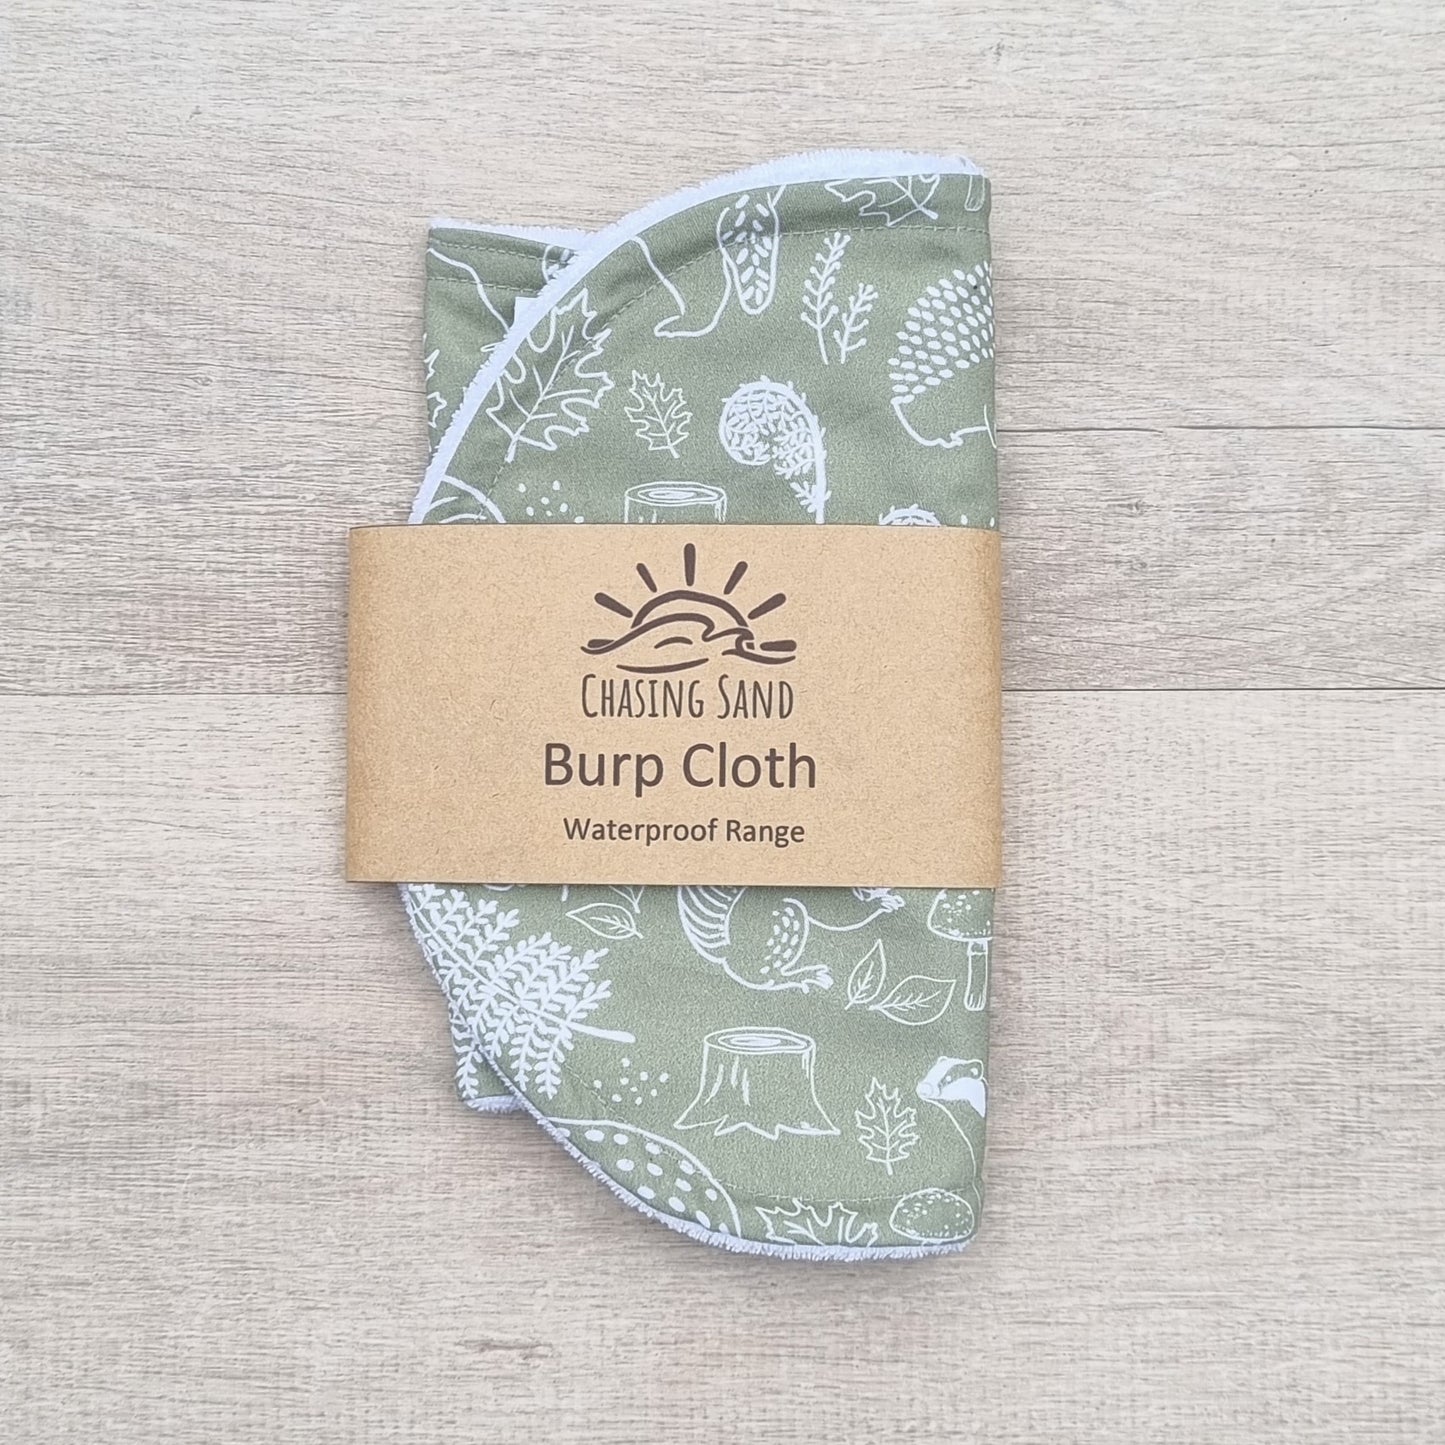 Burp Cloth - Into the Forest against wooden backdrop. White outlines of flora and fauna against sage green background.